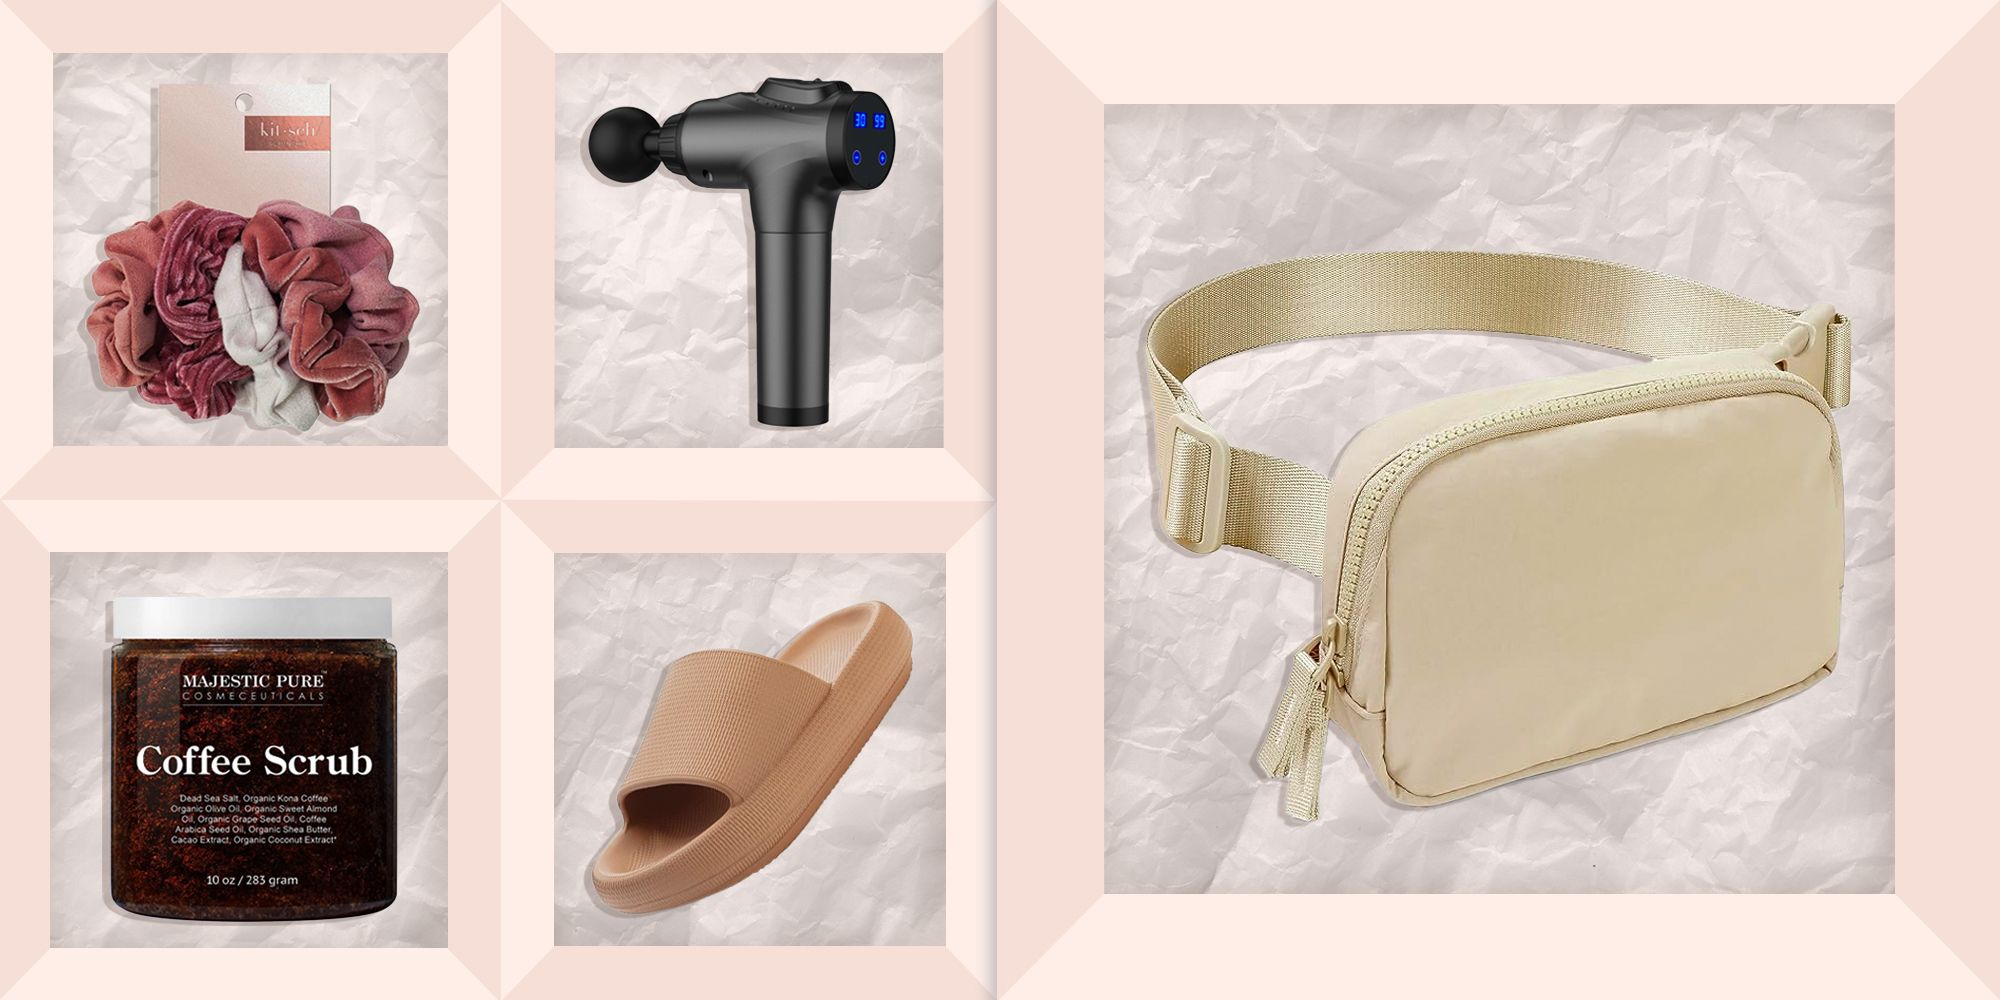 These 30 TikTok-Viral Finds Under $50 Would Make Great Holiday Gifts